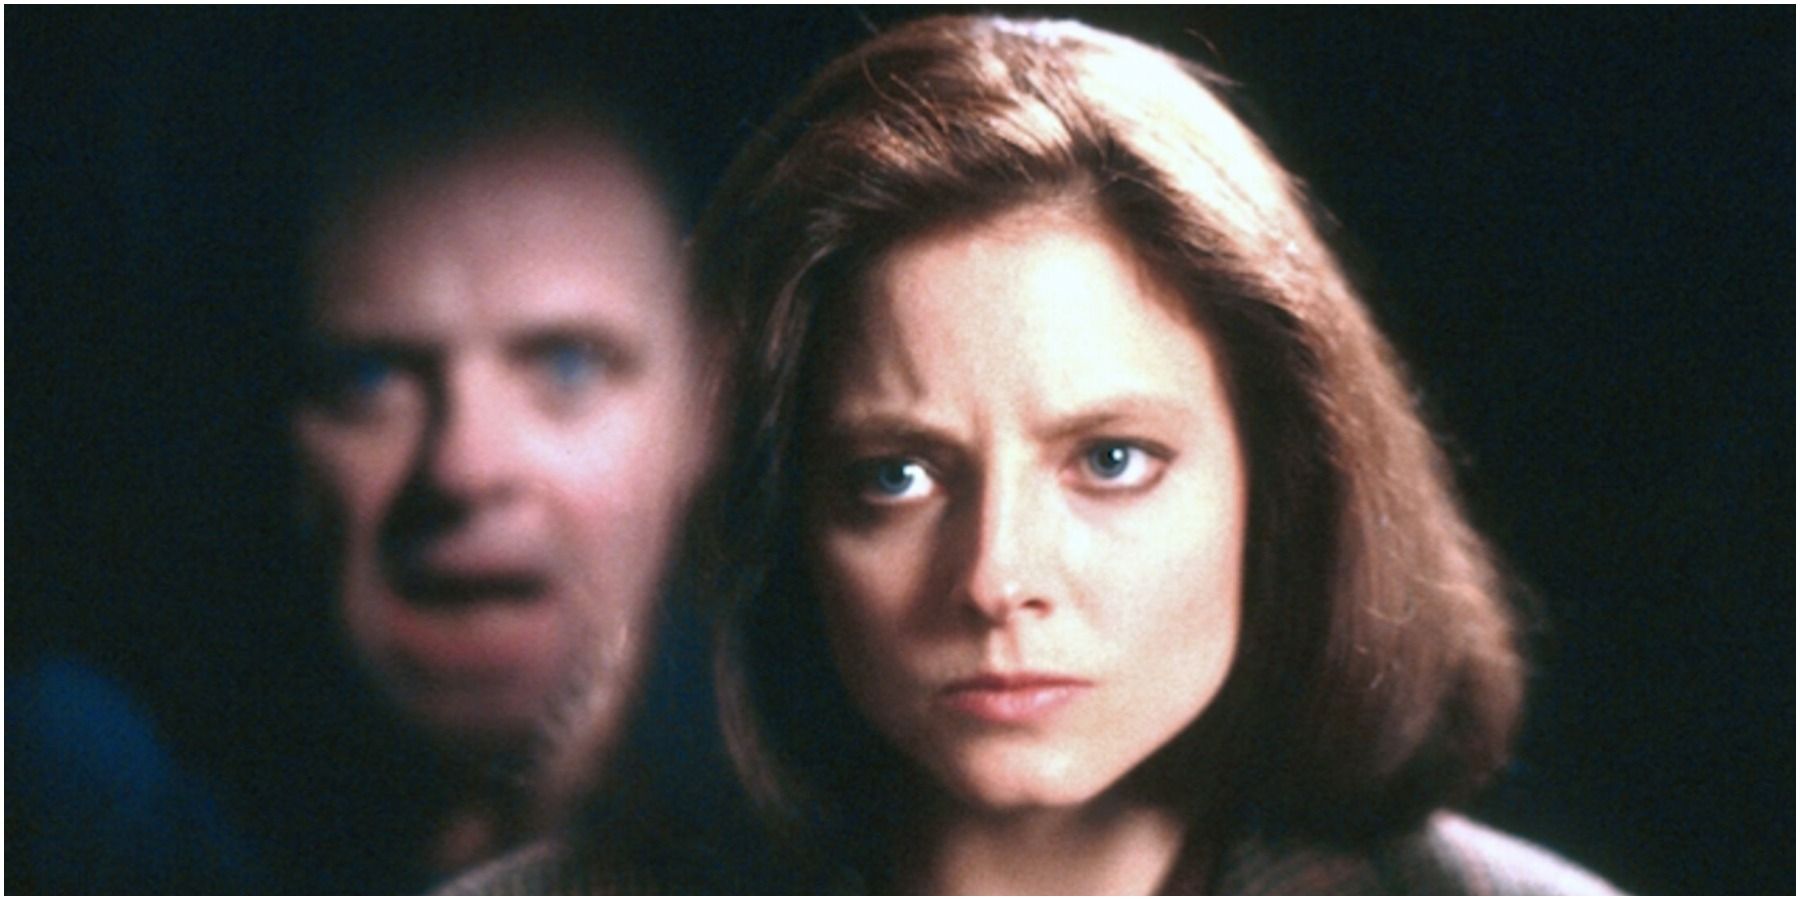 Hannibal Lector and Clarice Starling in Silence Of The Lambs